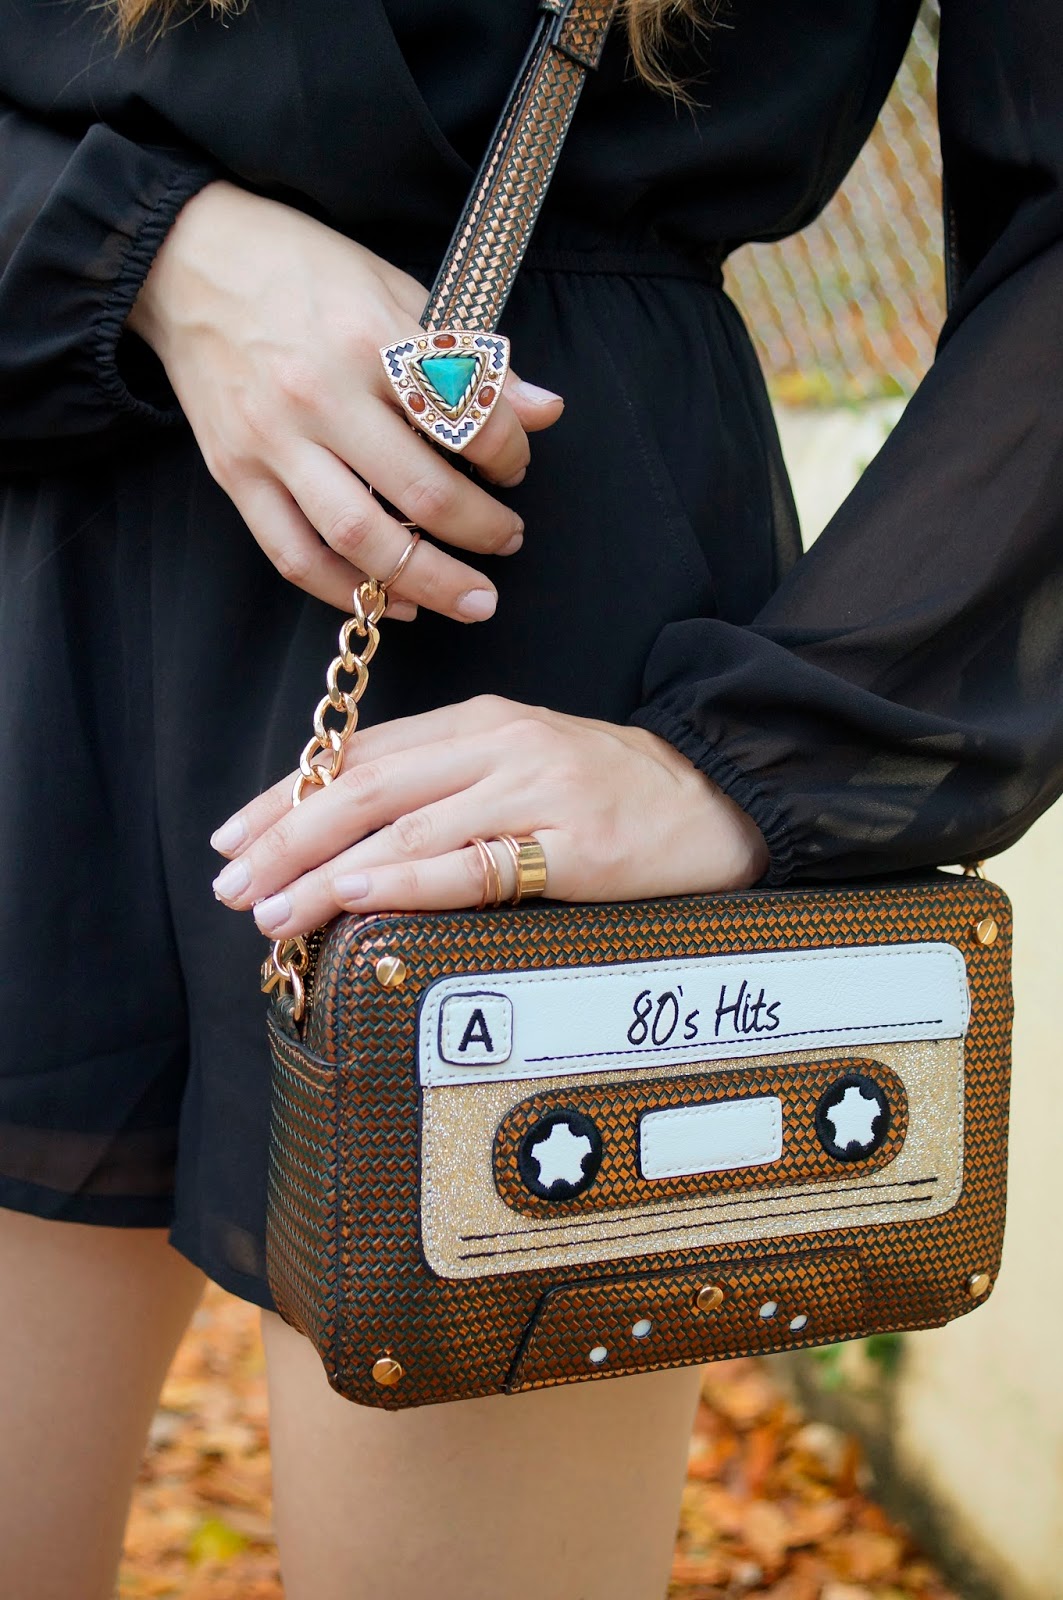 How adorable is this cassette purse!